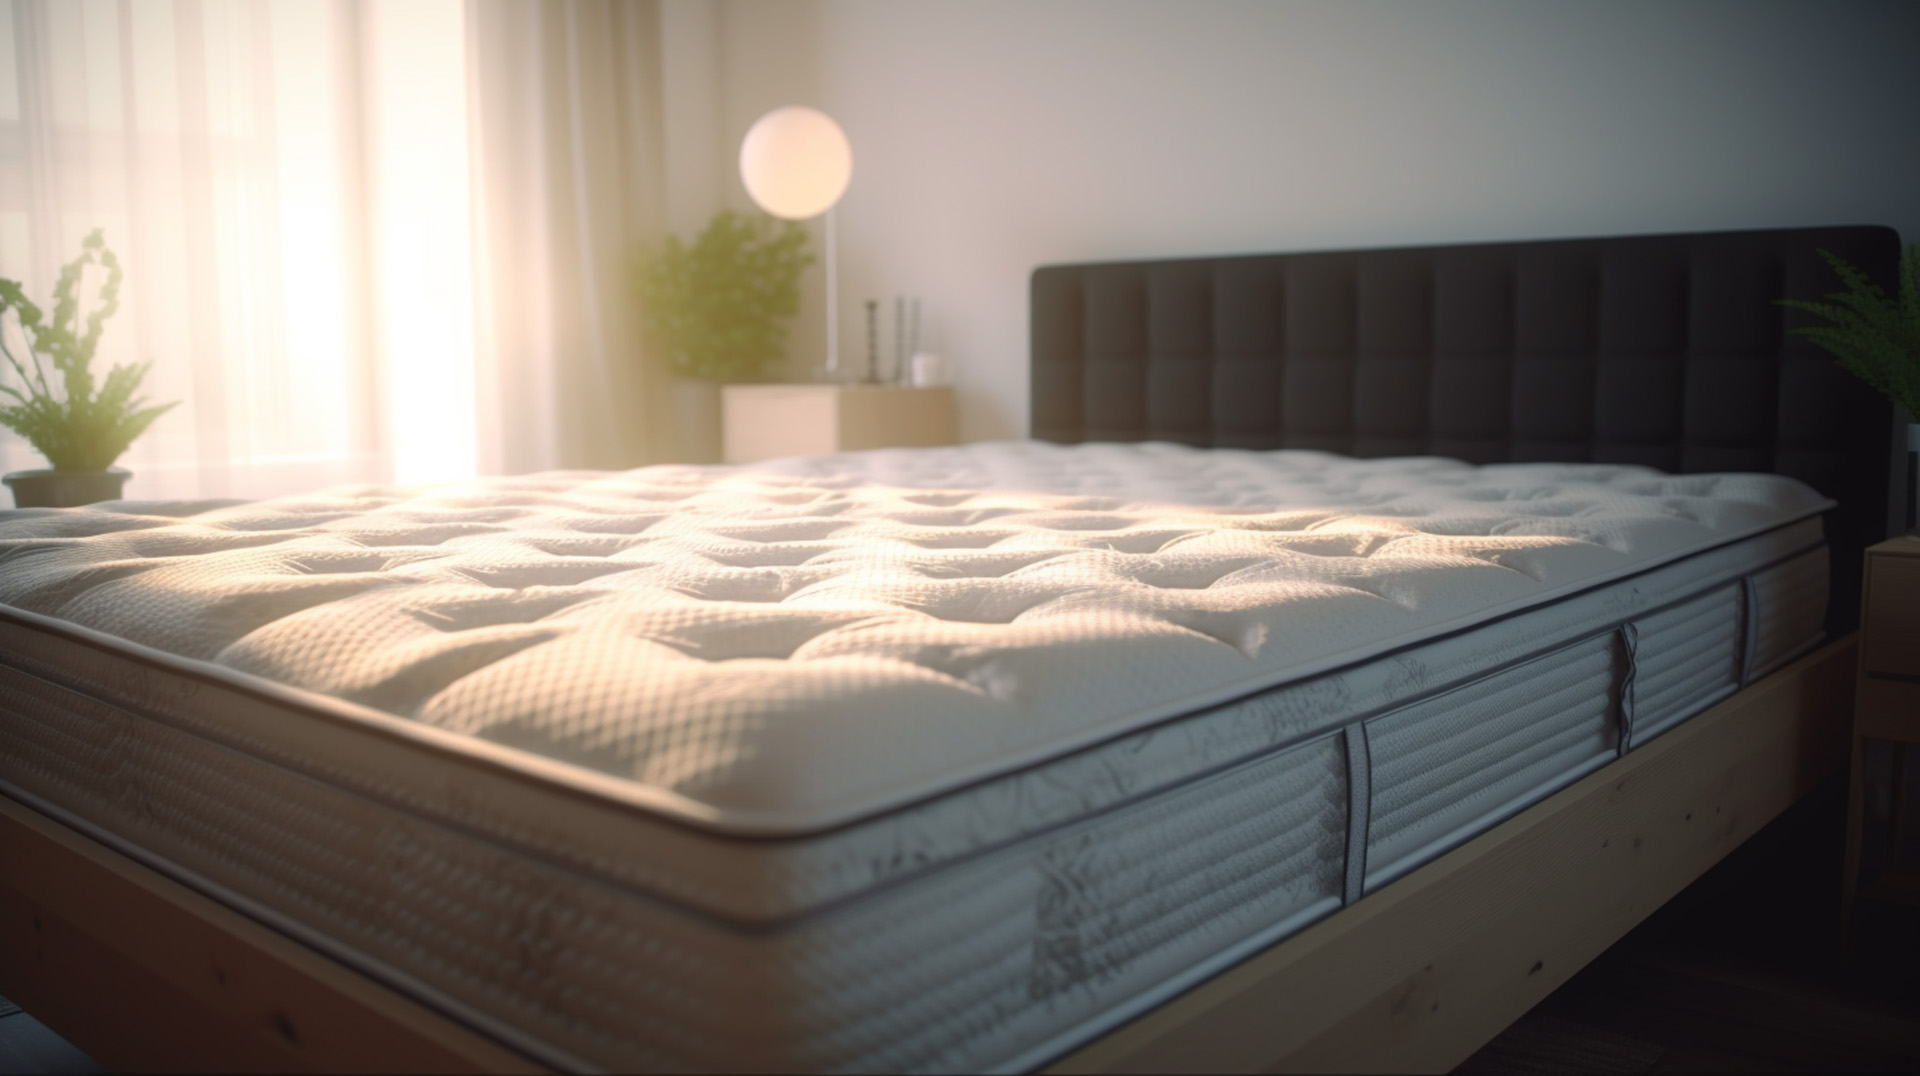 Shop Organic Mattresses and Beds in Hamilton, OH